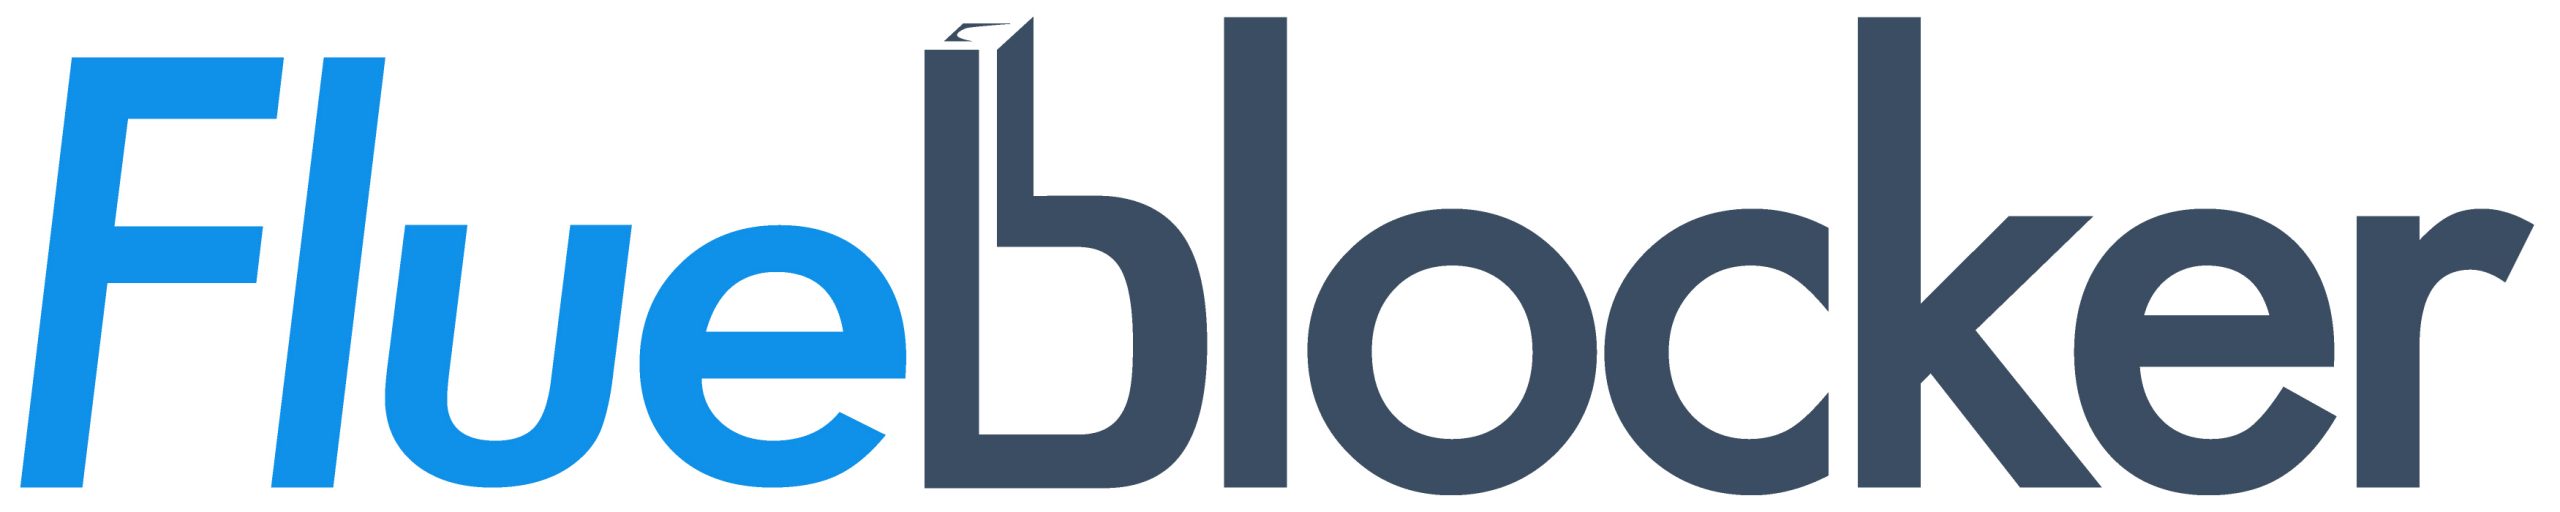 the flueblocker logo which chimney sheep has been rebranded as in the US